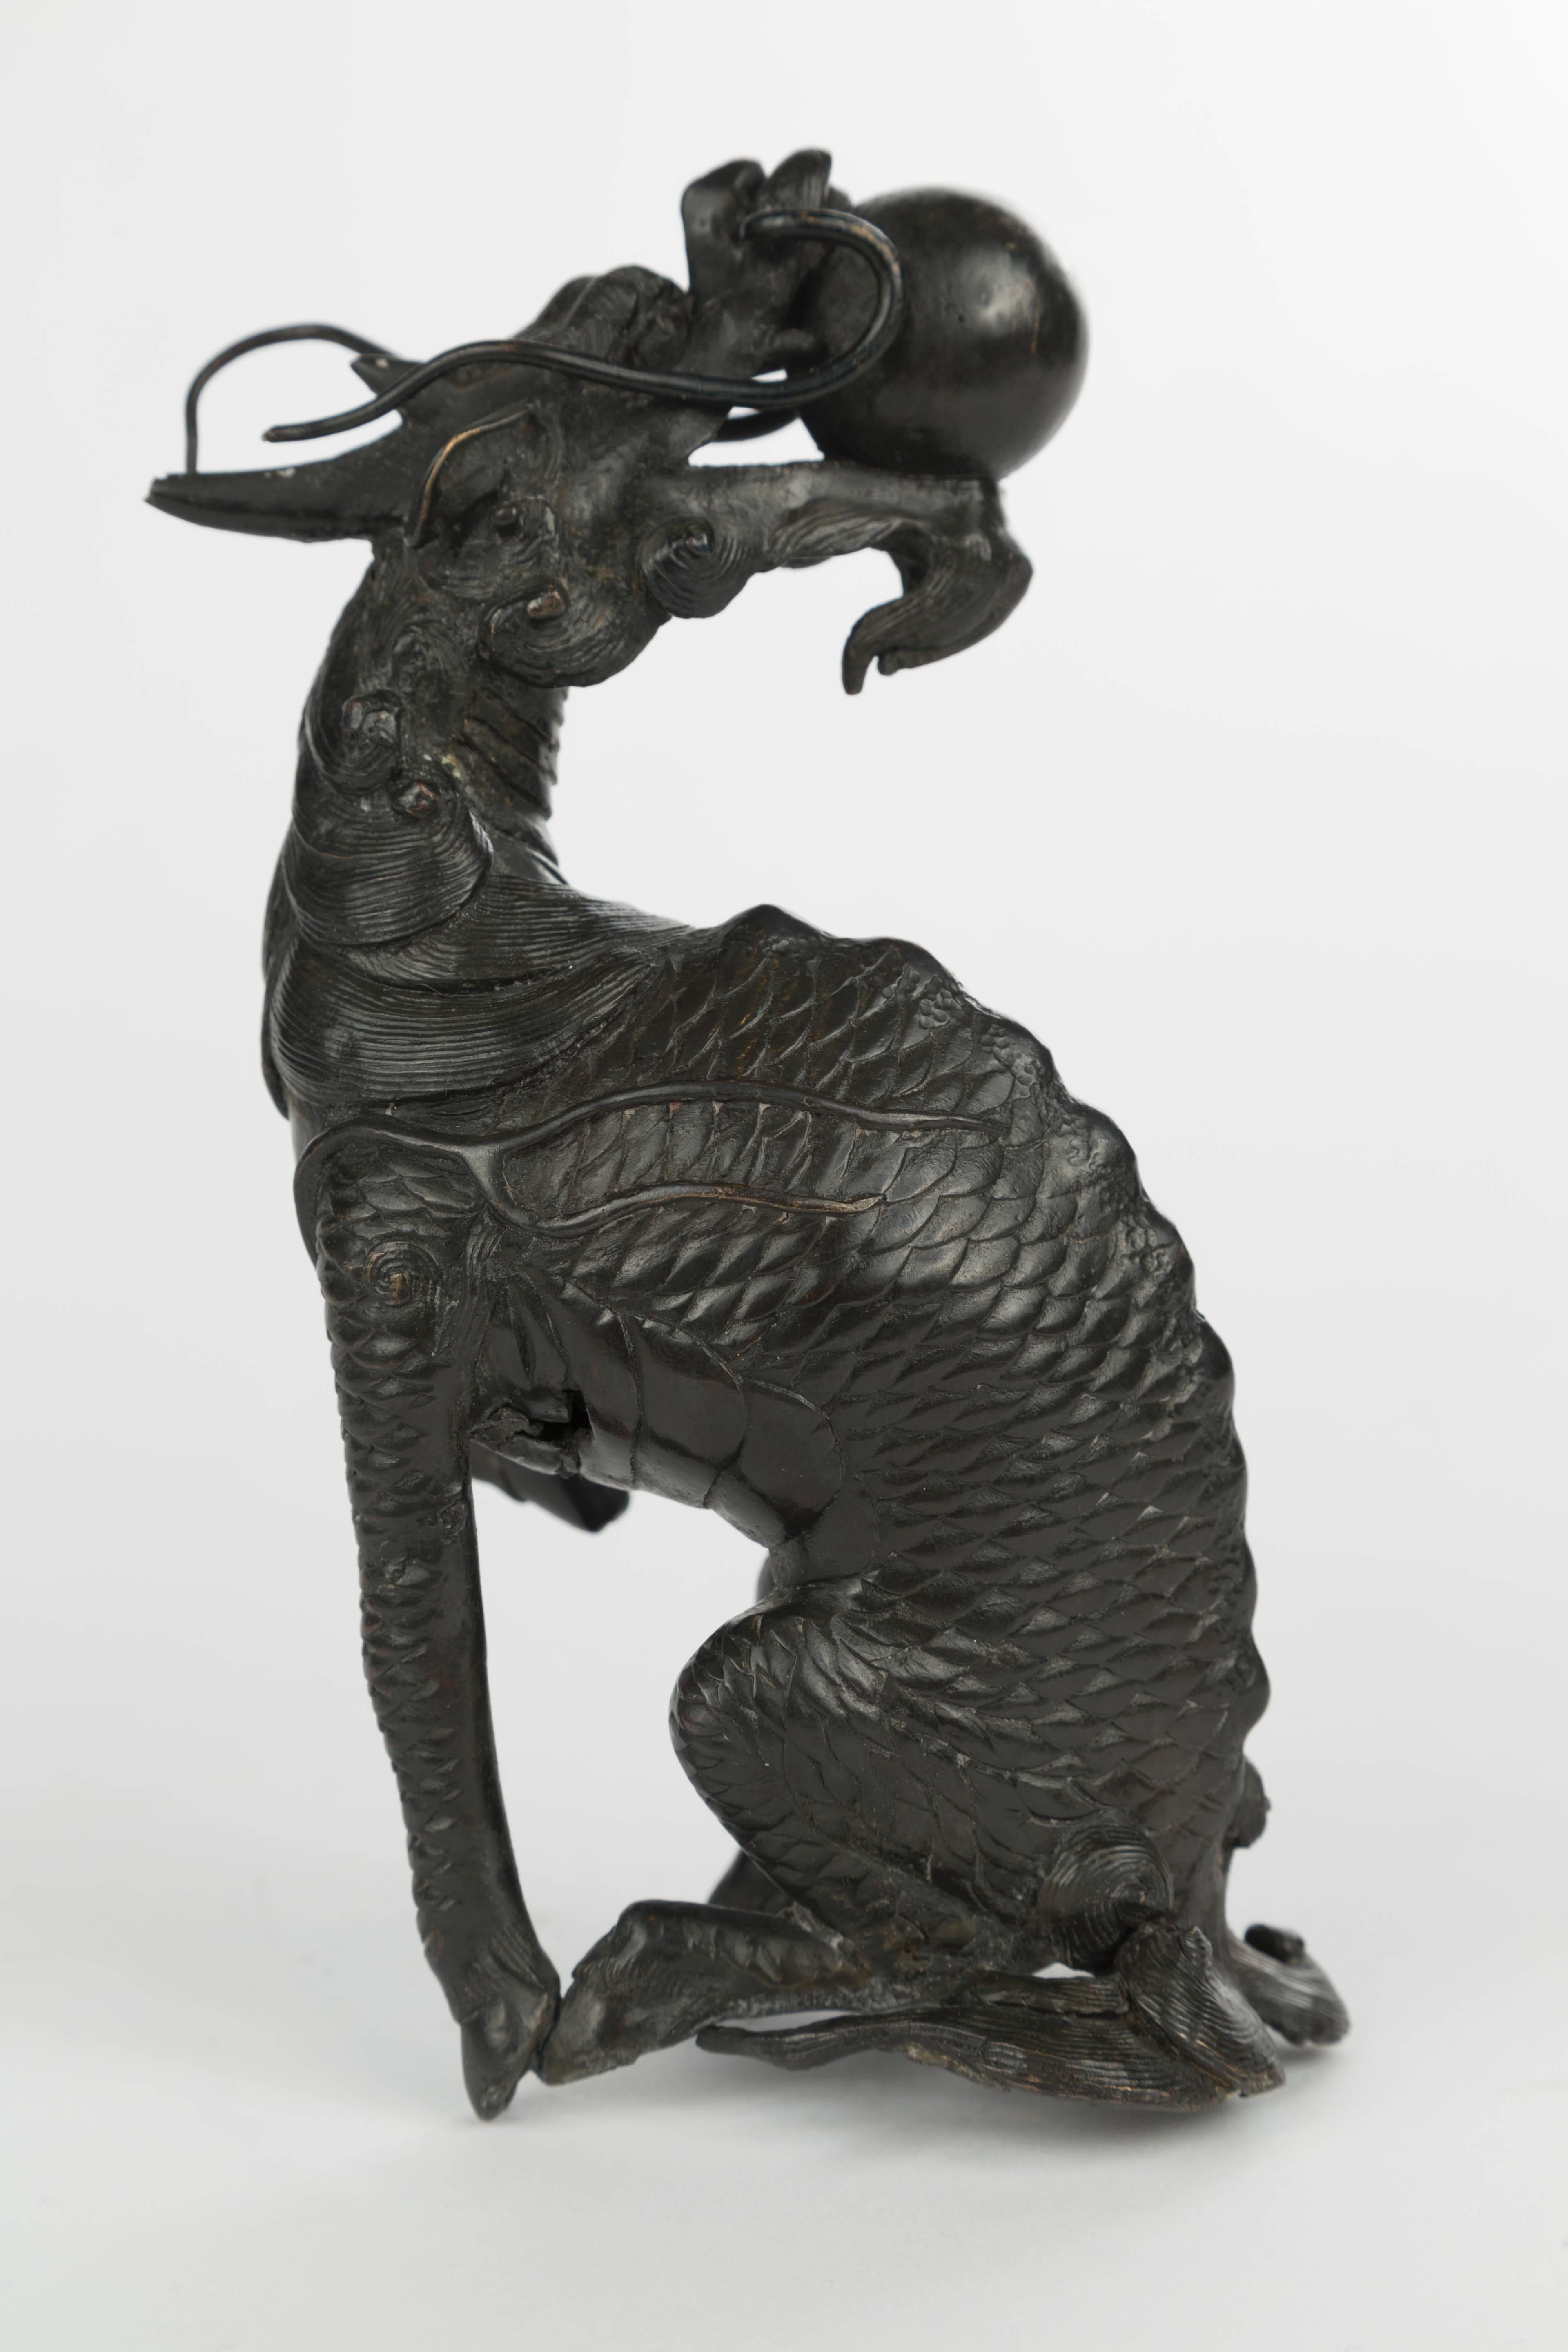 Qilin shown bearing the flaming pearl in his mouth.